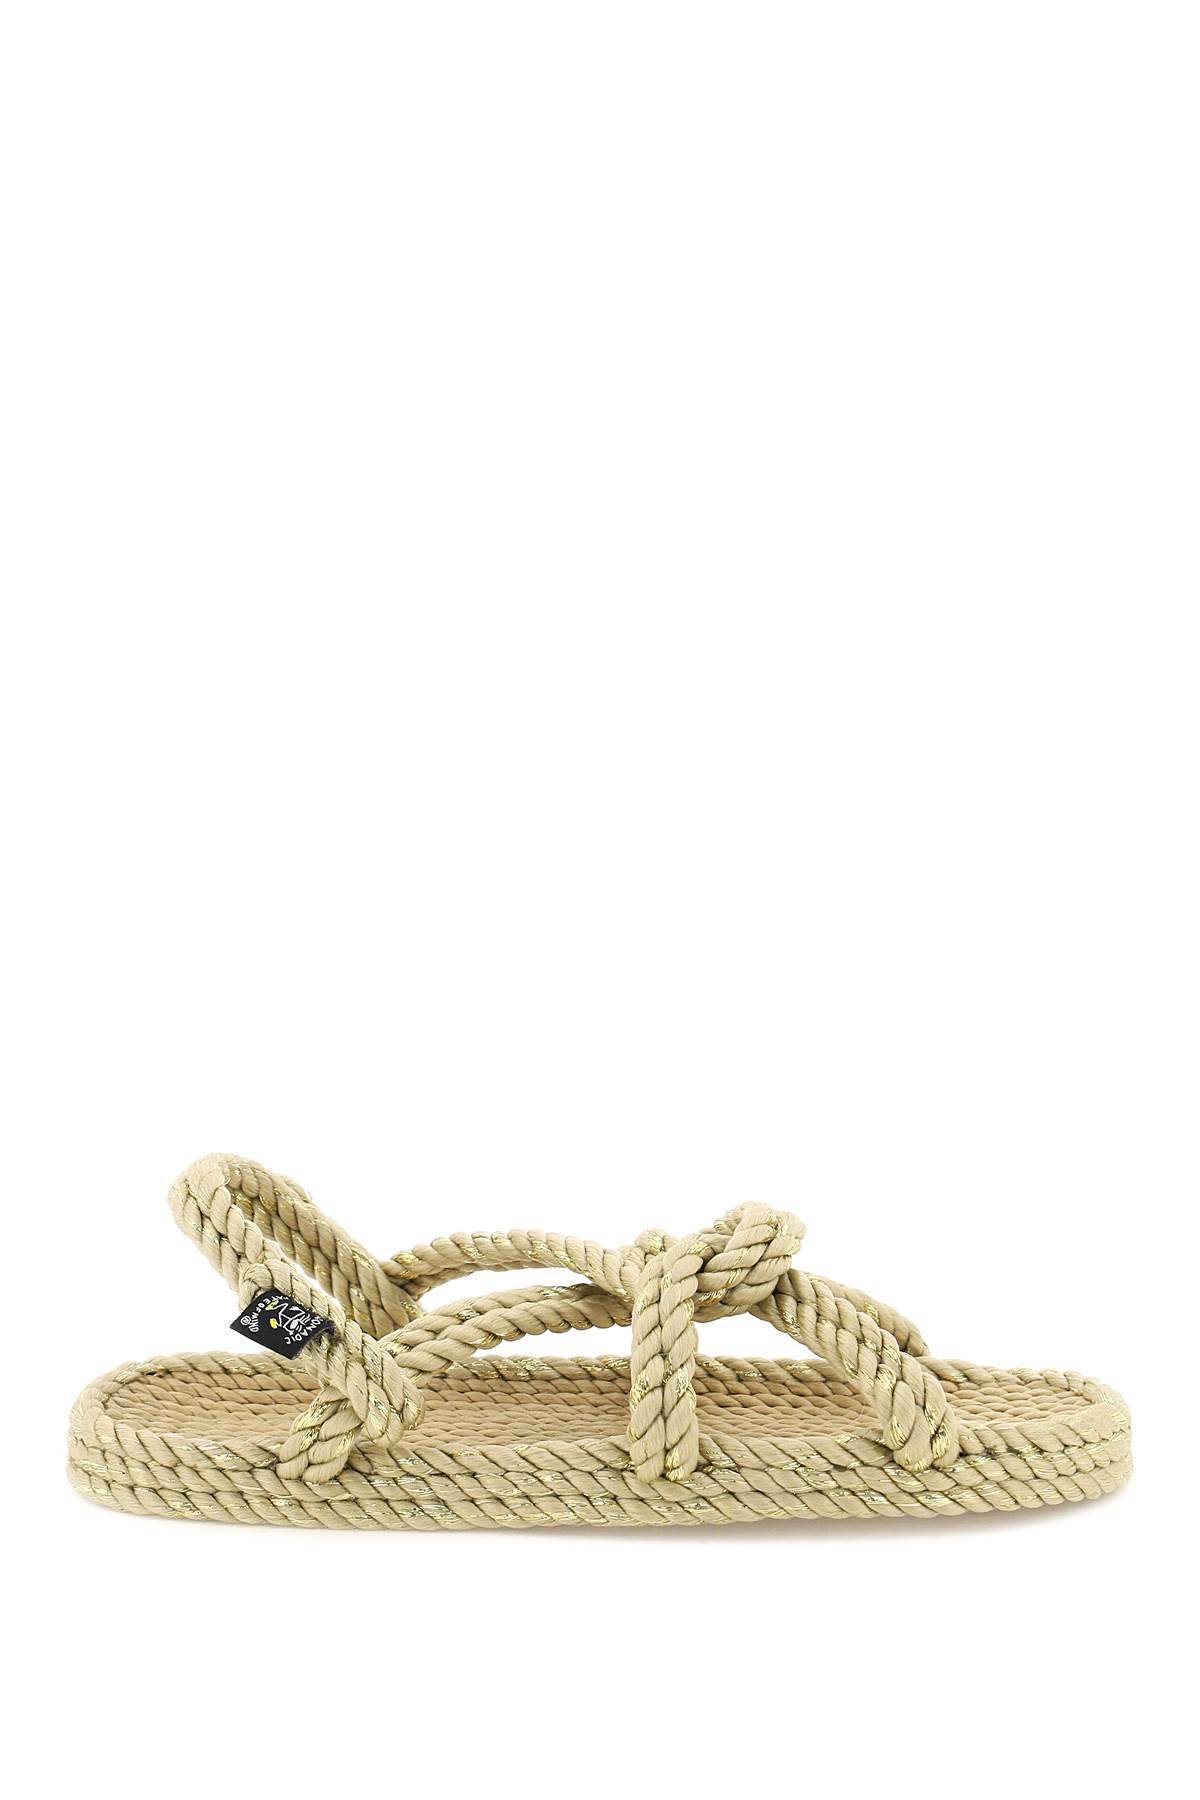 NOMADIC STATE OF MIND NOMADIC STATE OF MIND mountain momma's rope sandals